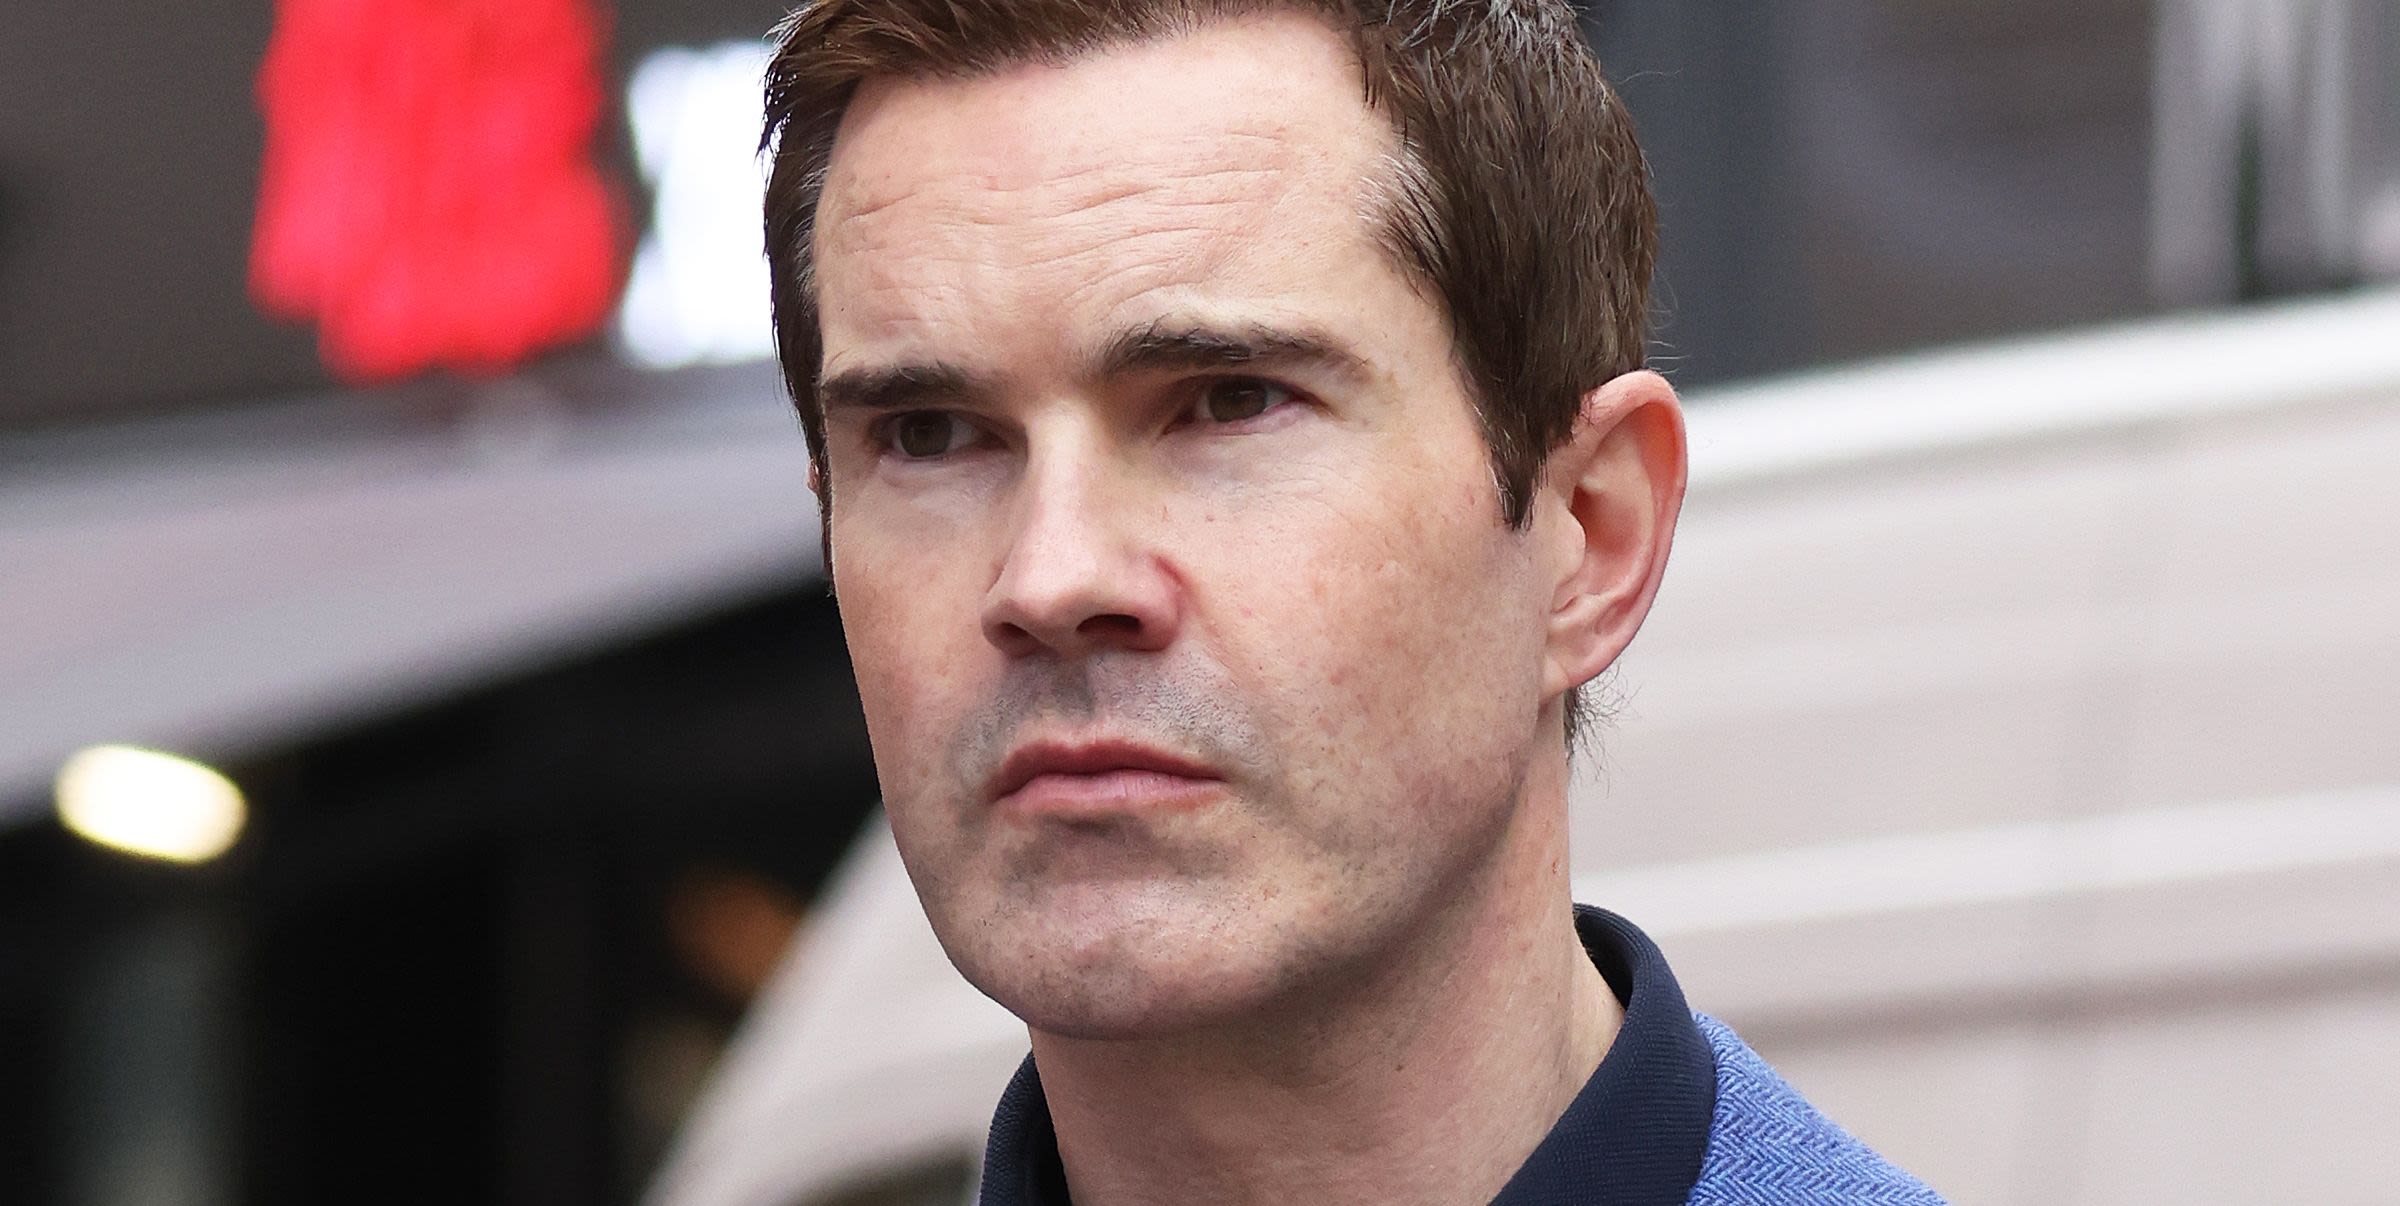 Jimmy Carr reveals he was "close to death" while battling life-threatening infection